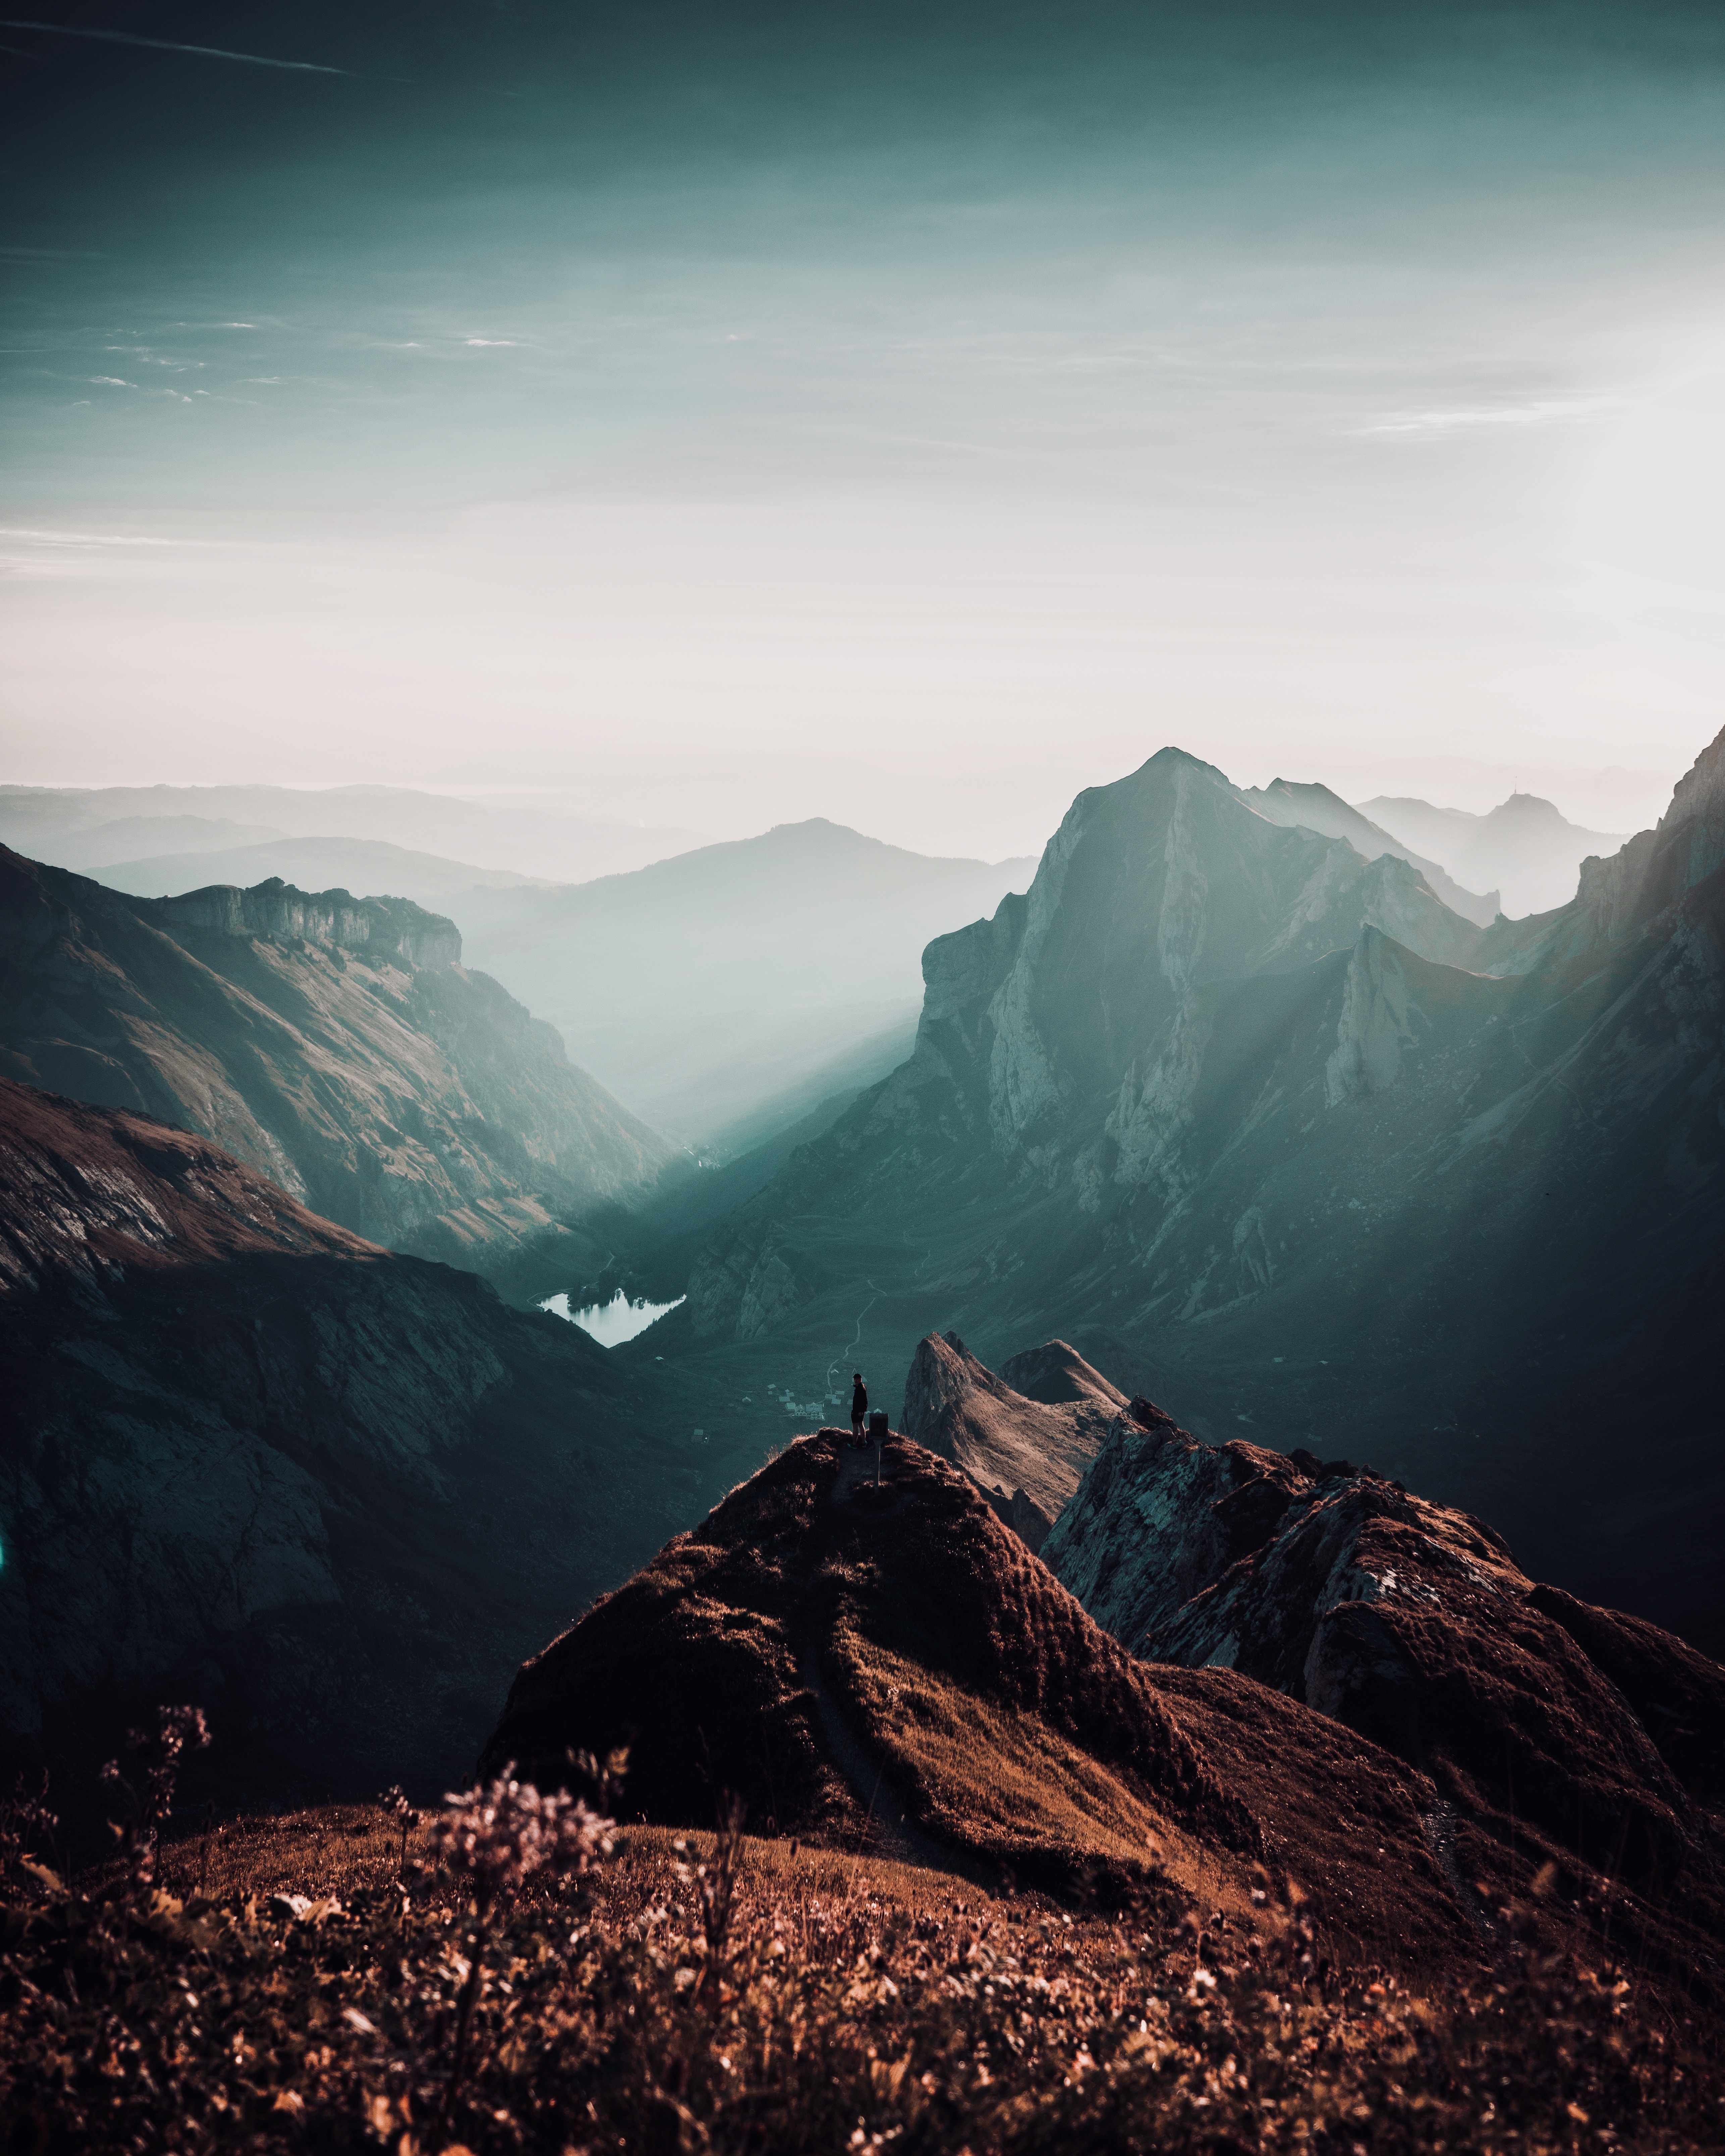 tops, loneliness, nature, privacy, mountains, vertex, seclusion, switzerland Phone Background